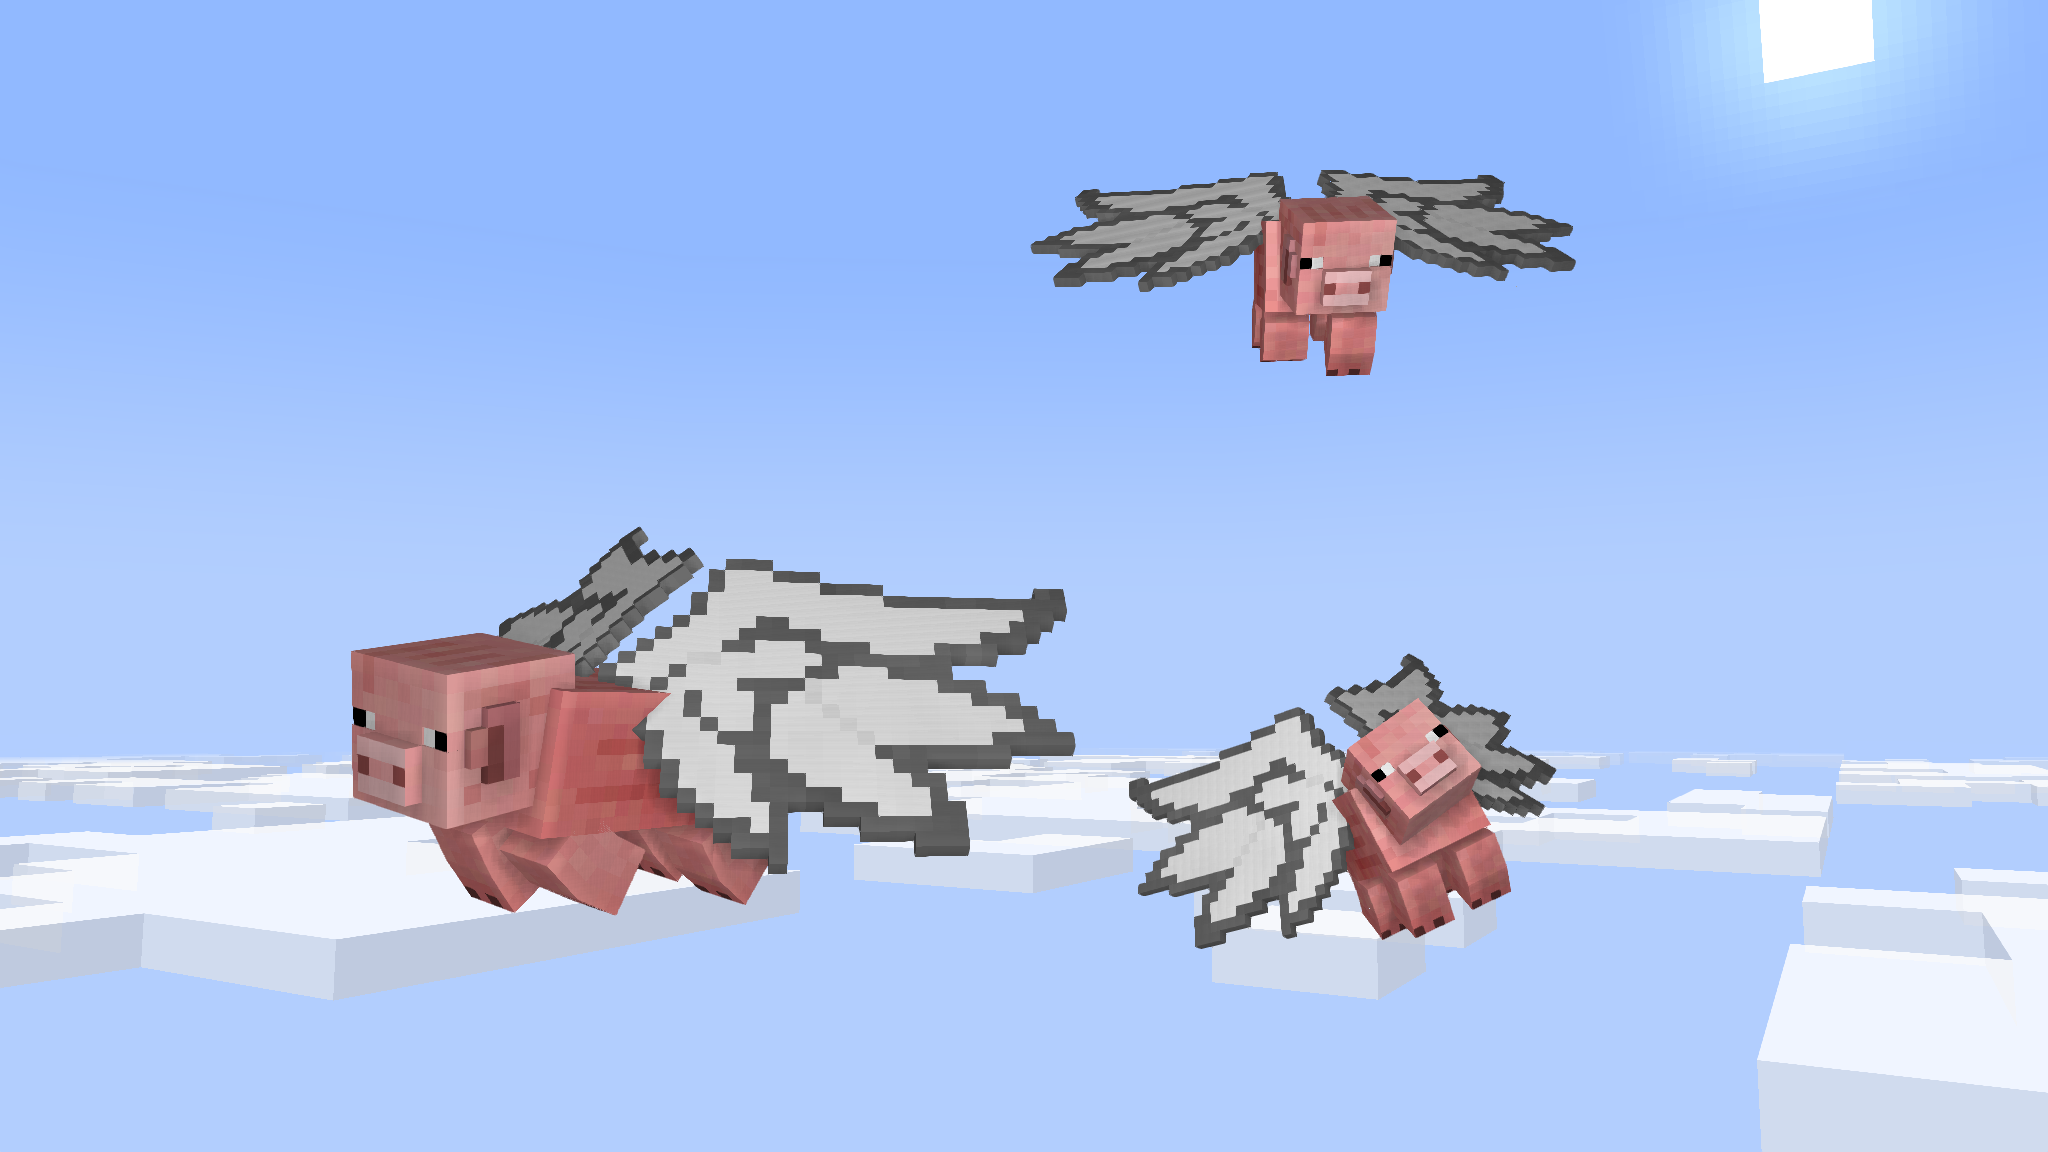 animated screensavers flying pigs